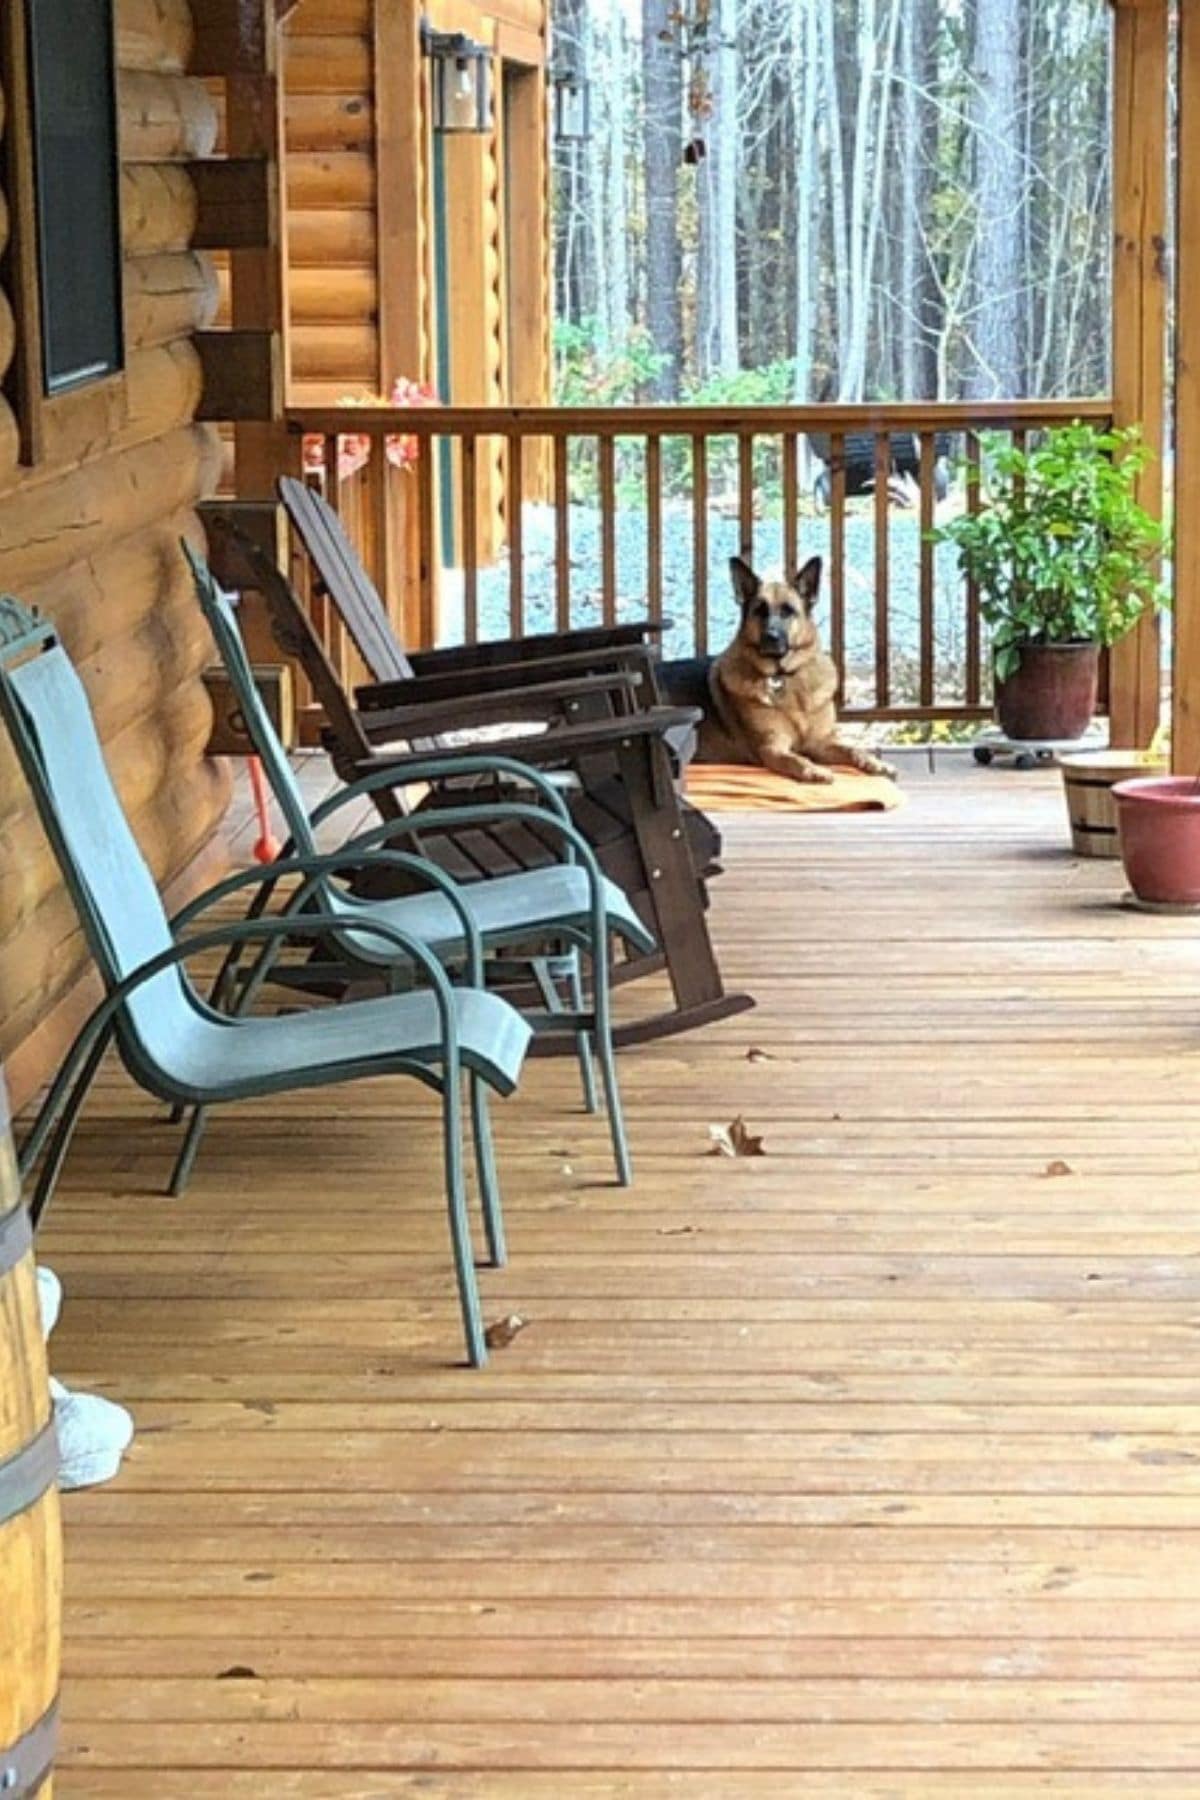 green wire chairs against wall of porch with dog in background